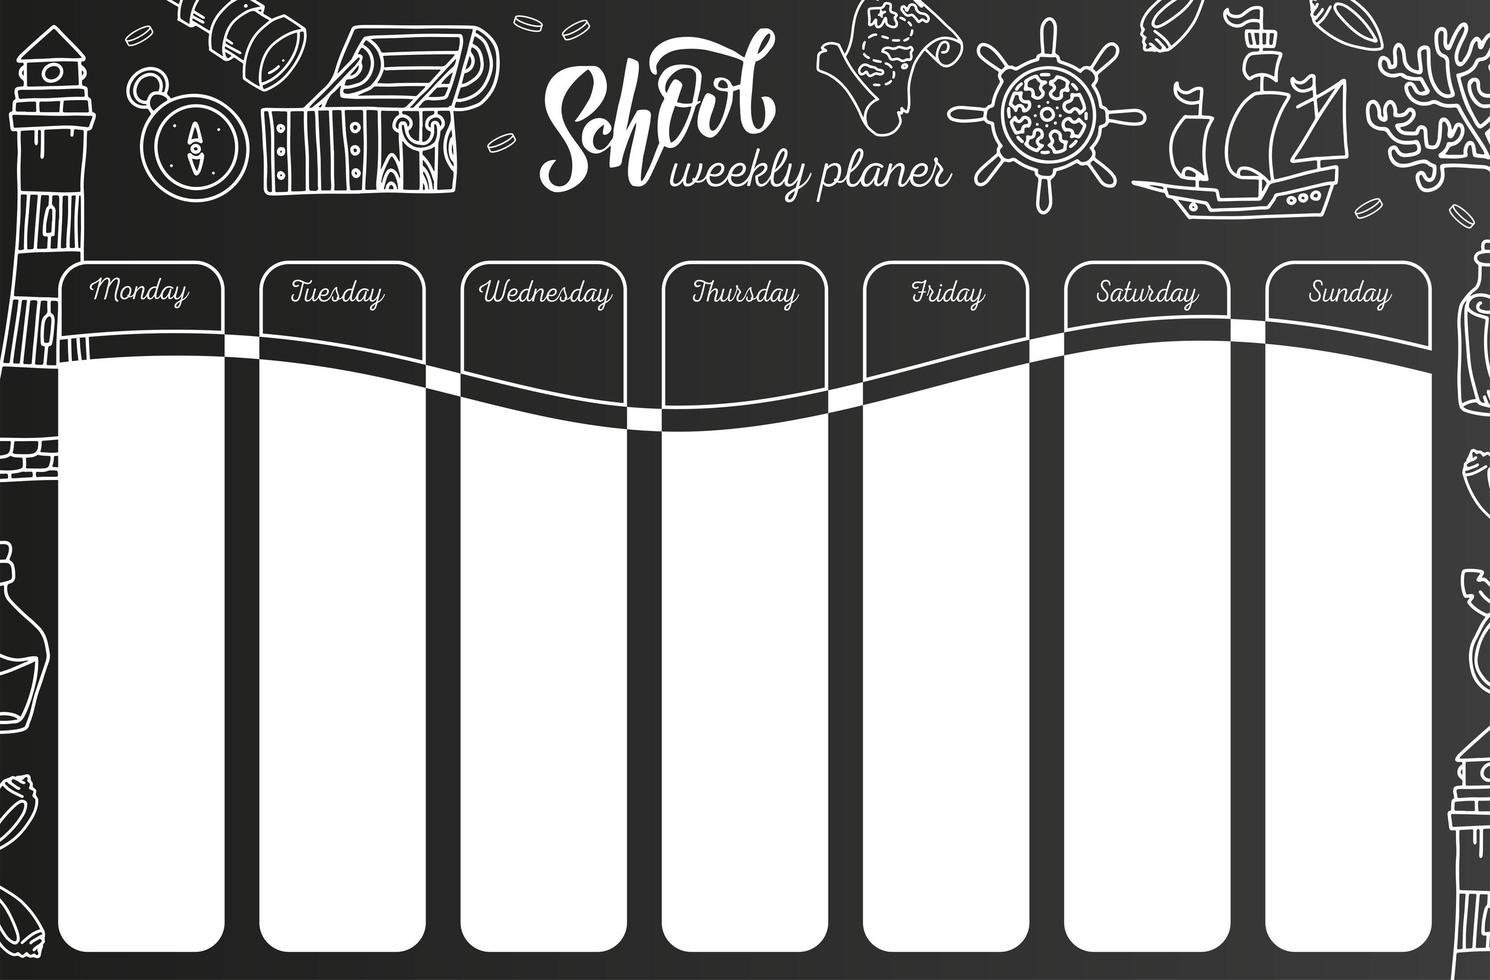 Weekly Calendar on chalkboard . 7 day plan on black chalkboard background. School timetable template with hand written text, Adventure sea travel symbols. lessons shedule in sketchy style with doodles vector